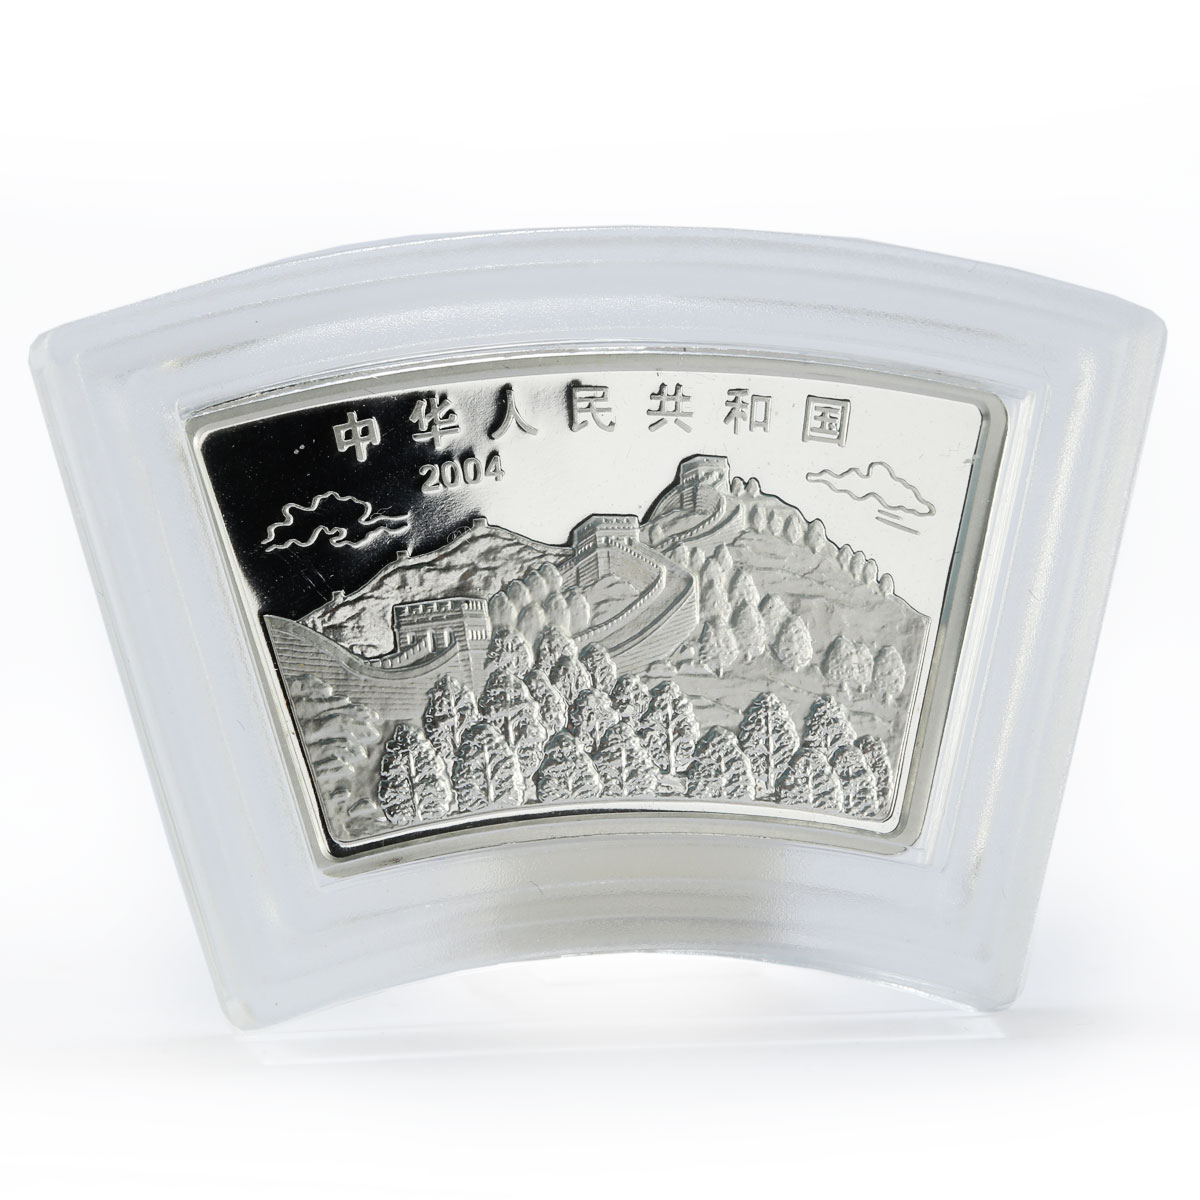 China 10 yuan Year of the Monkey proof silver coin 2004